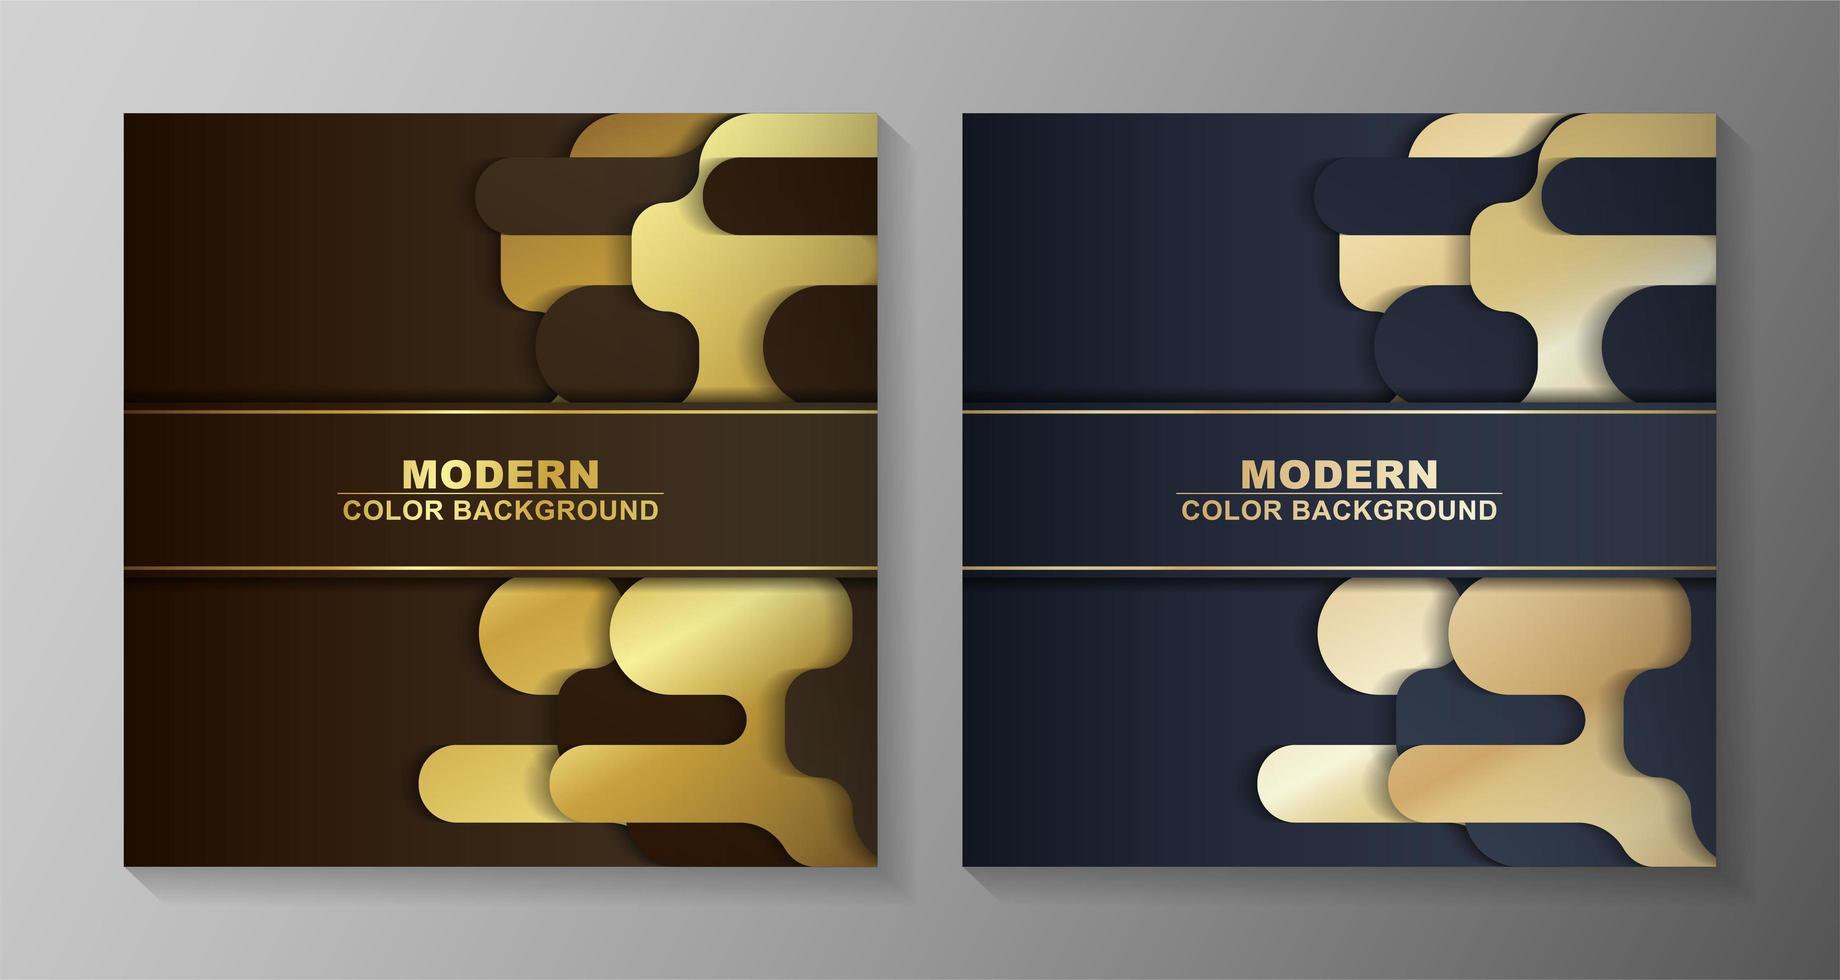 Minimal covers with rounded geometric shapes vector